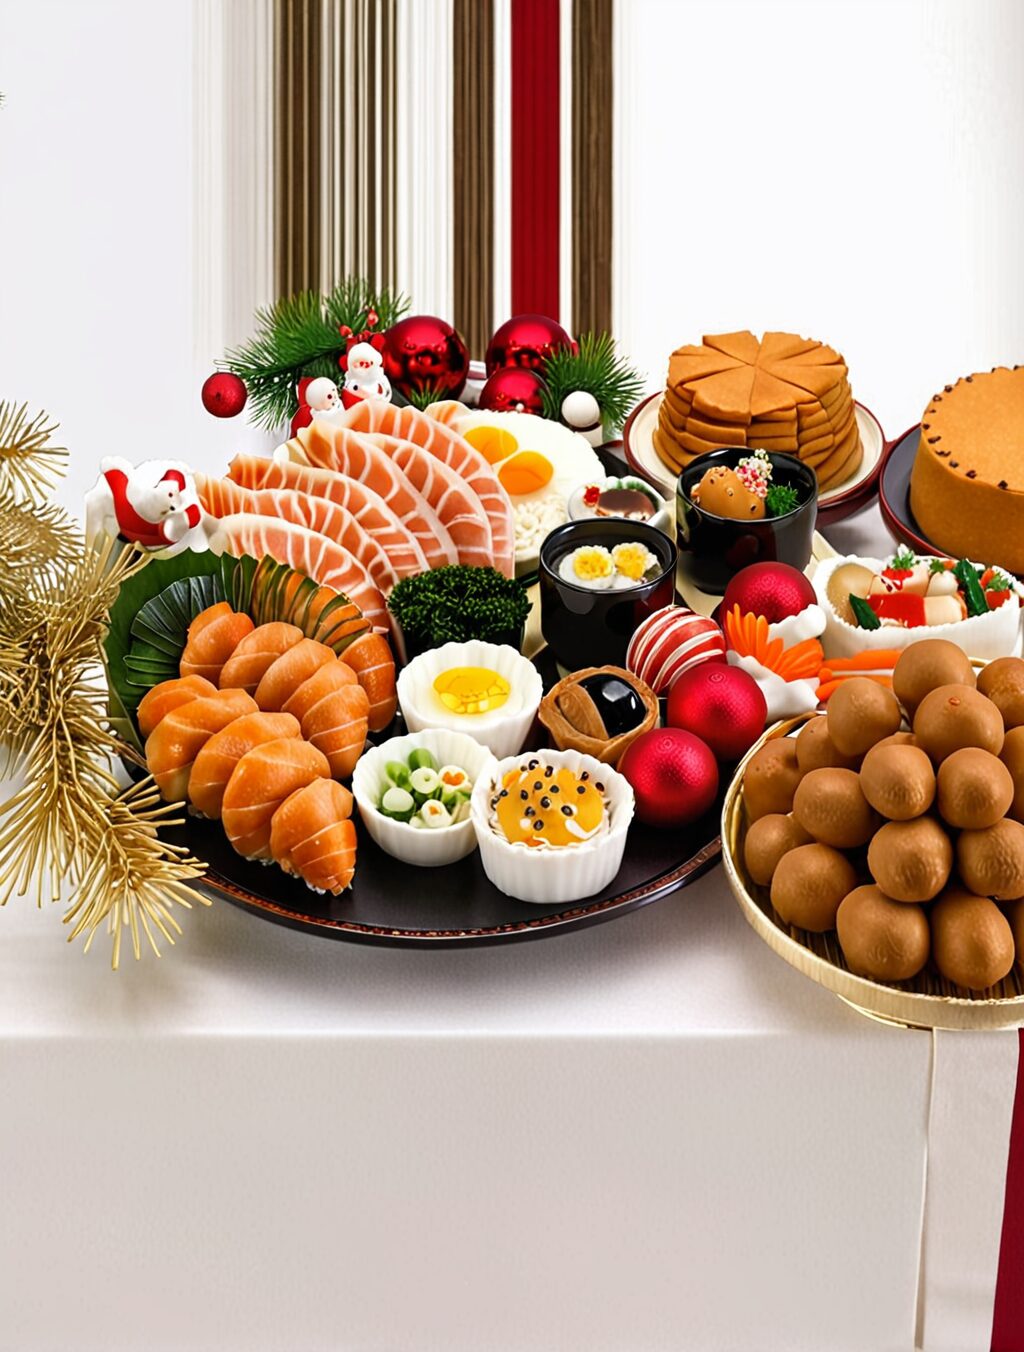 what food do they eat for christmas in japan